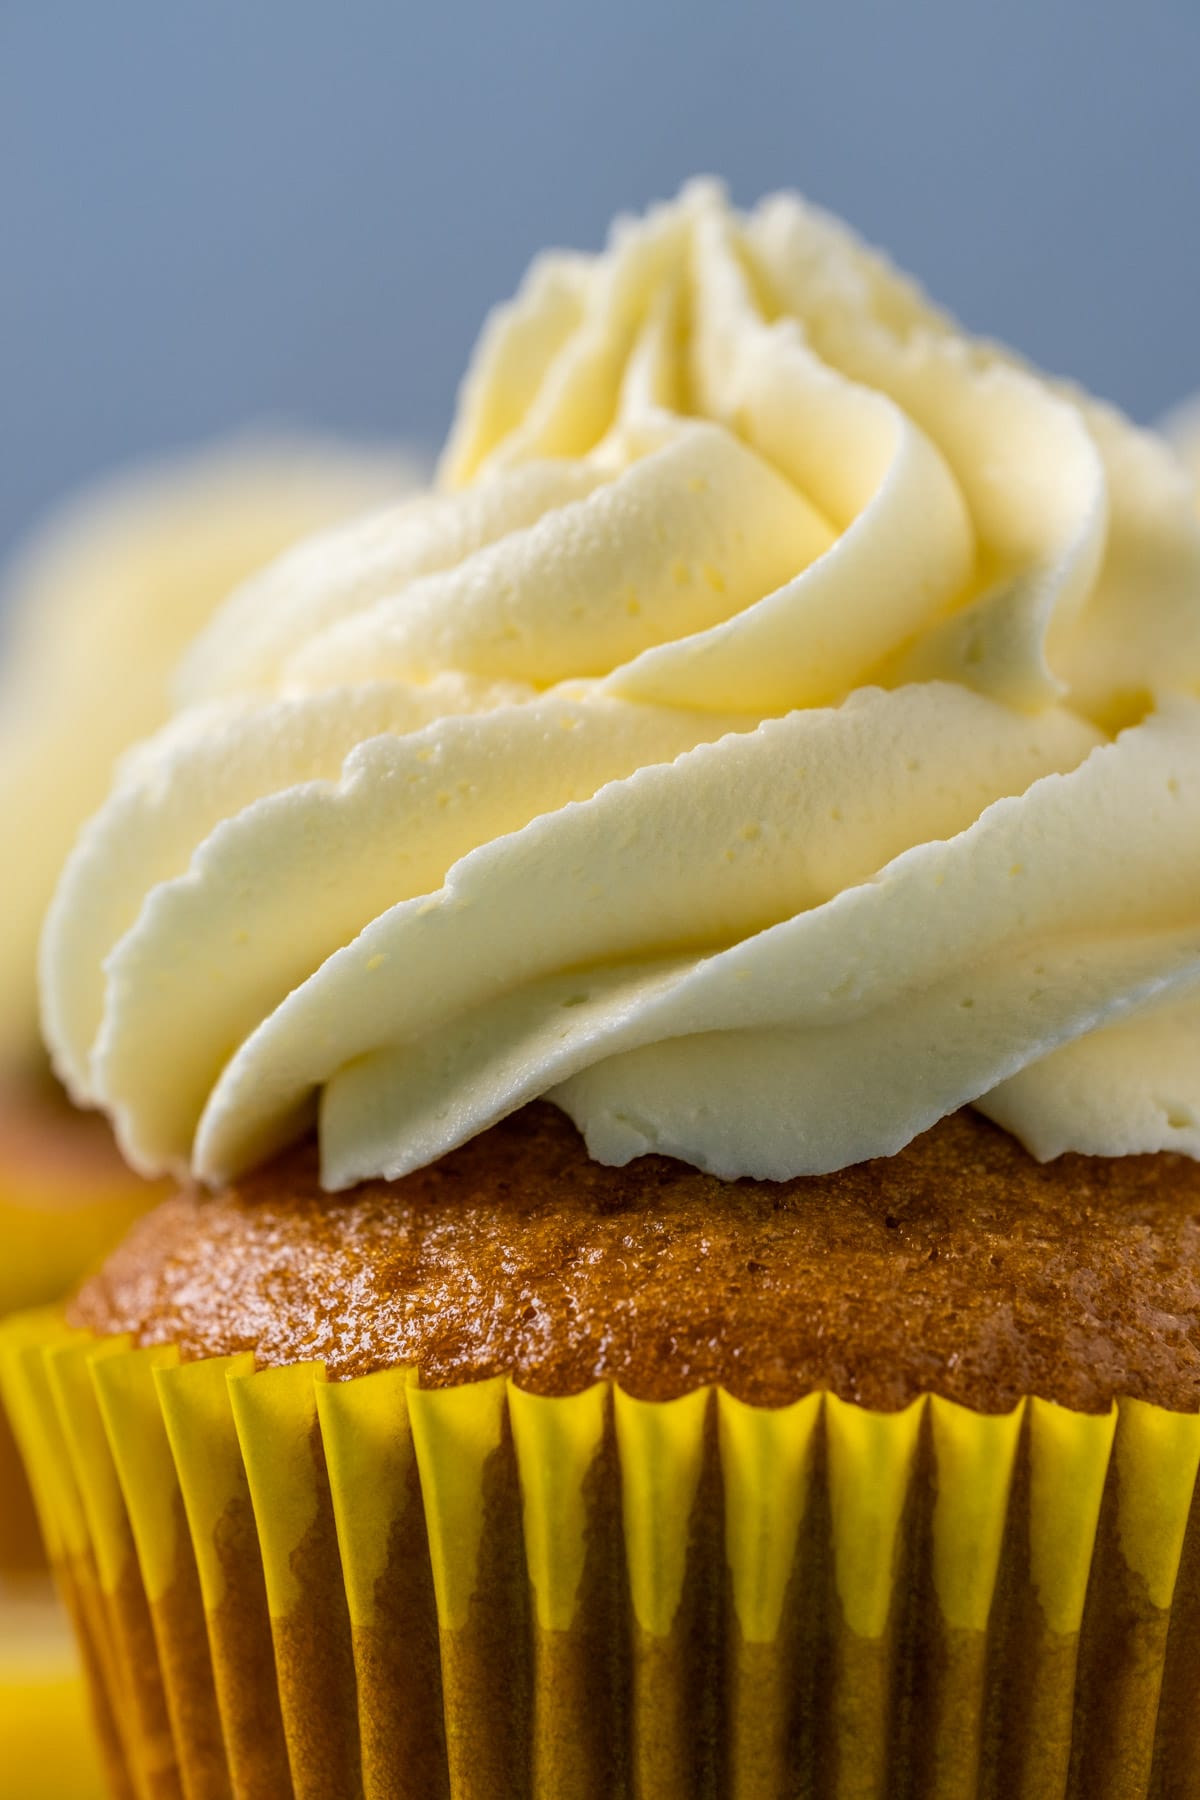 Cupcake topped with lemon buttercream frosting.